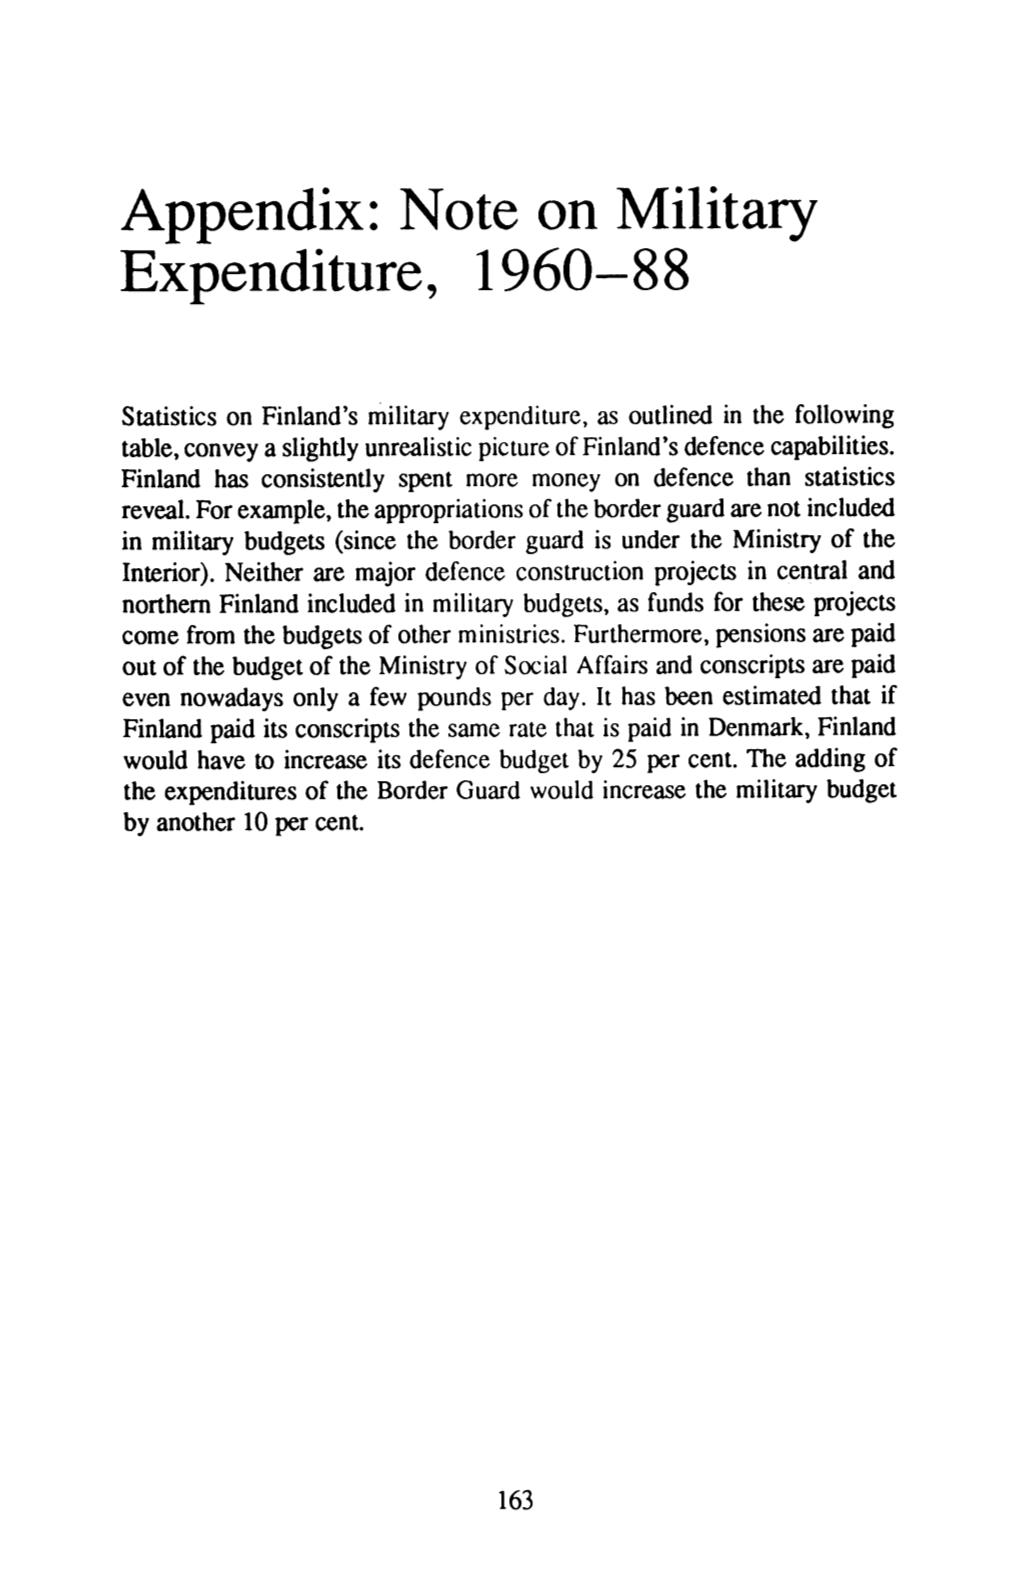 Appendix: Note on Military Expenditure, 1960-88